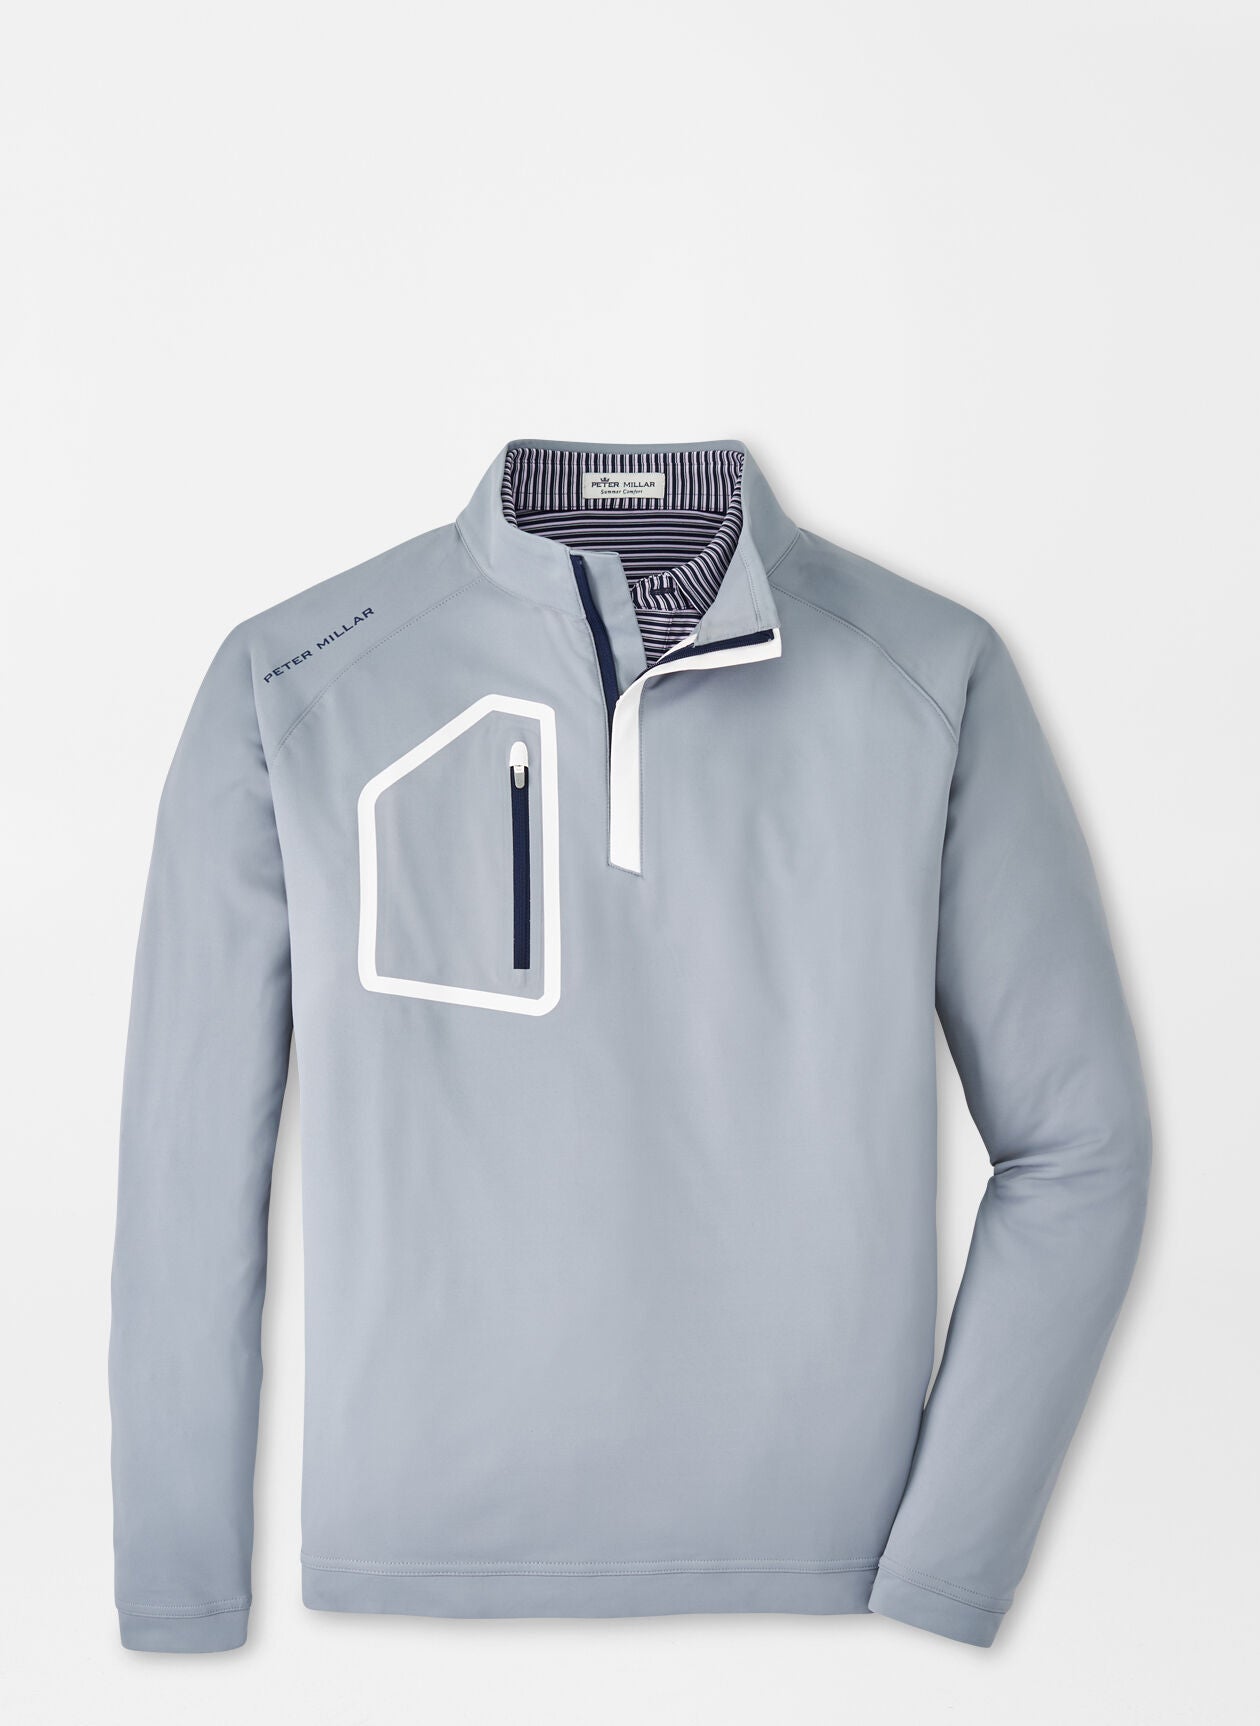 FORGE PERFORMANCE 1/4 ZIP